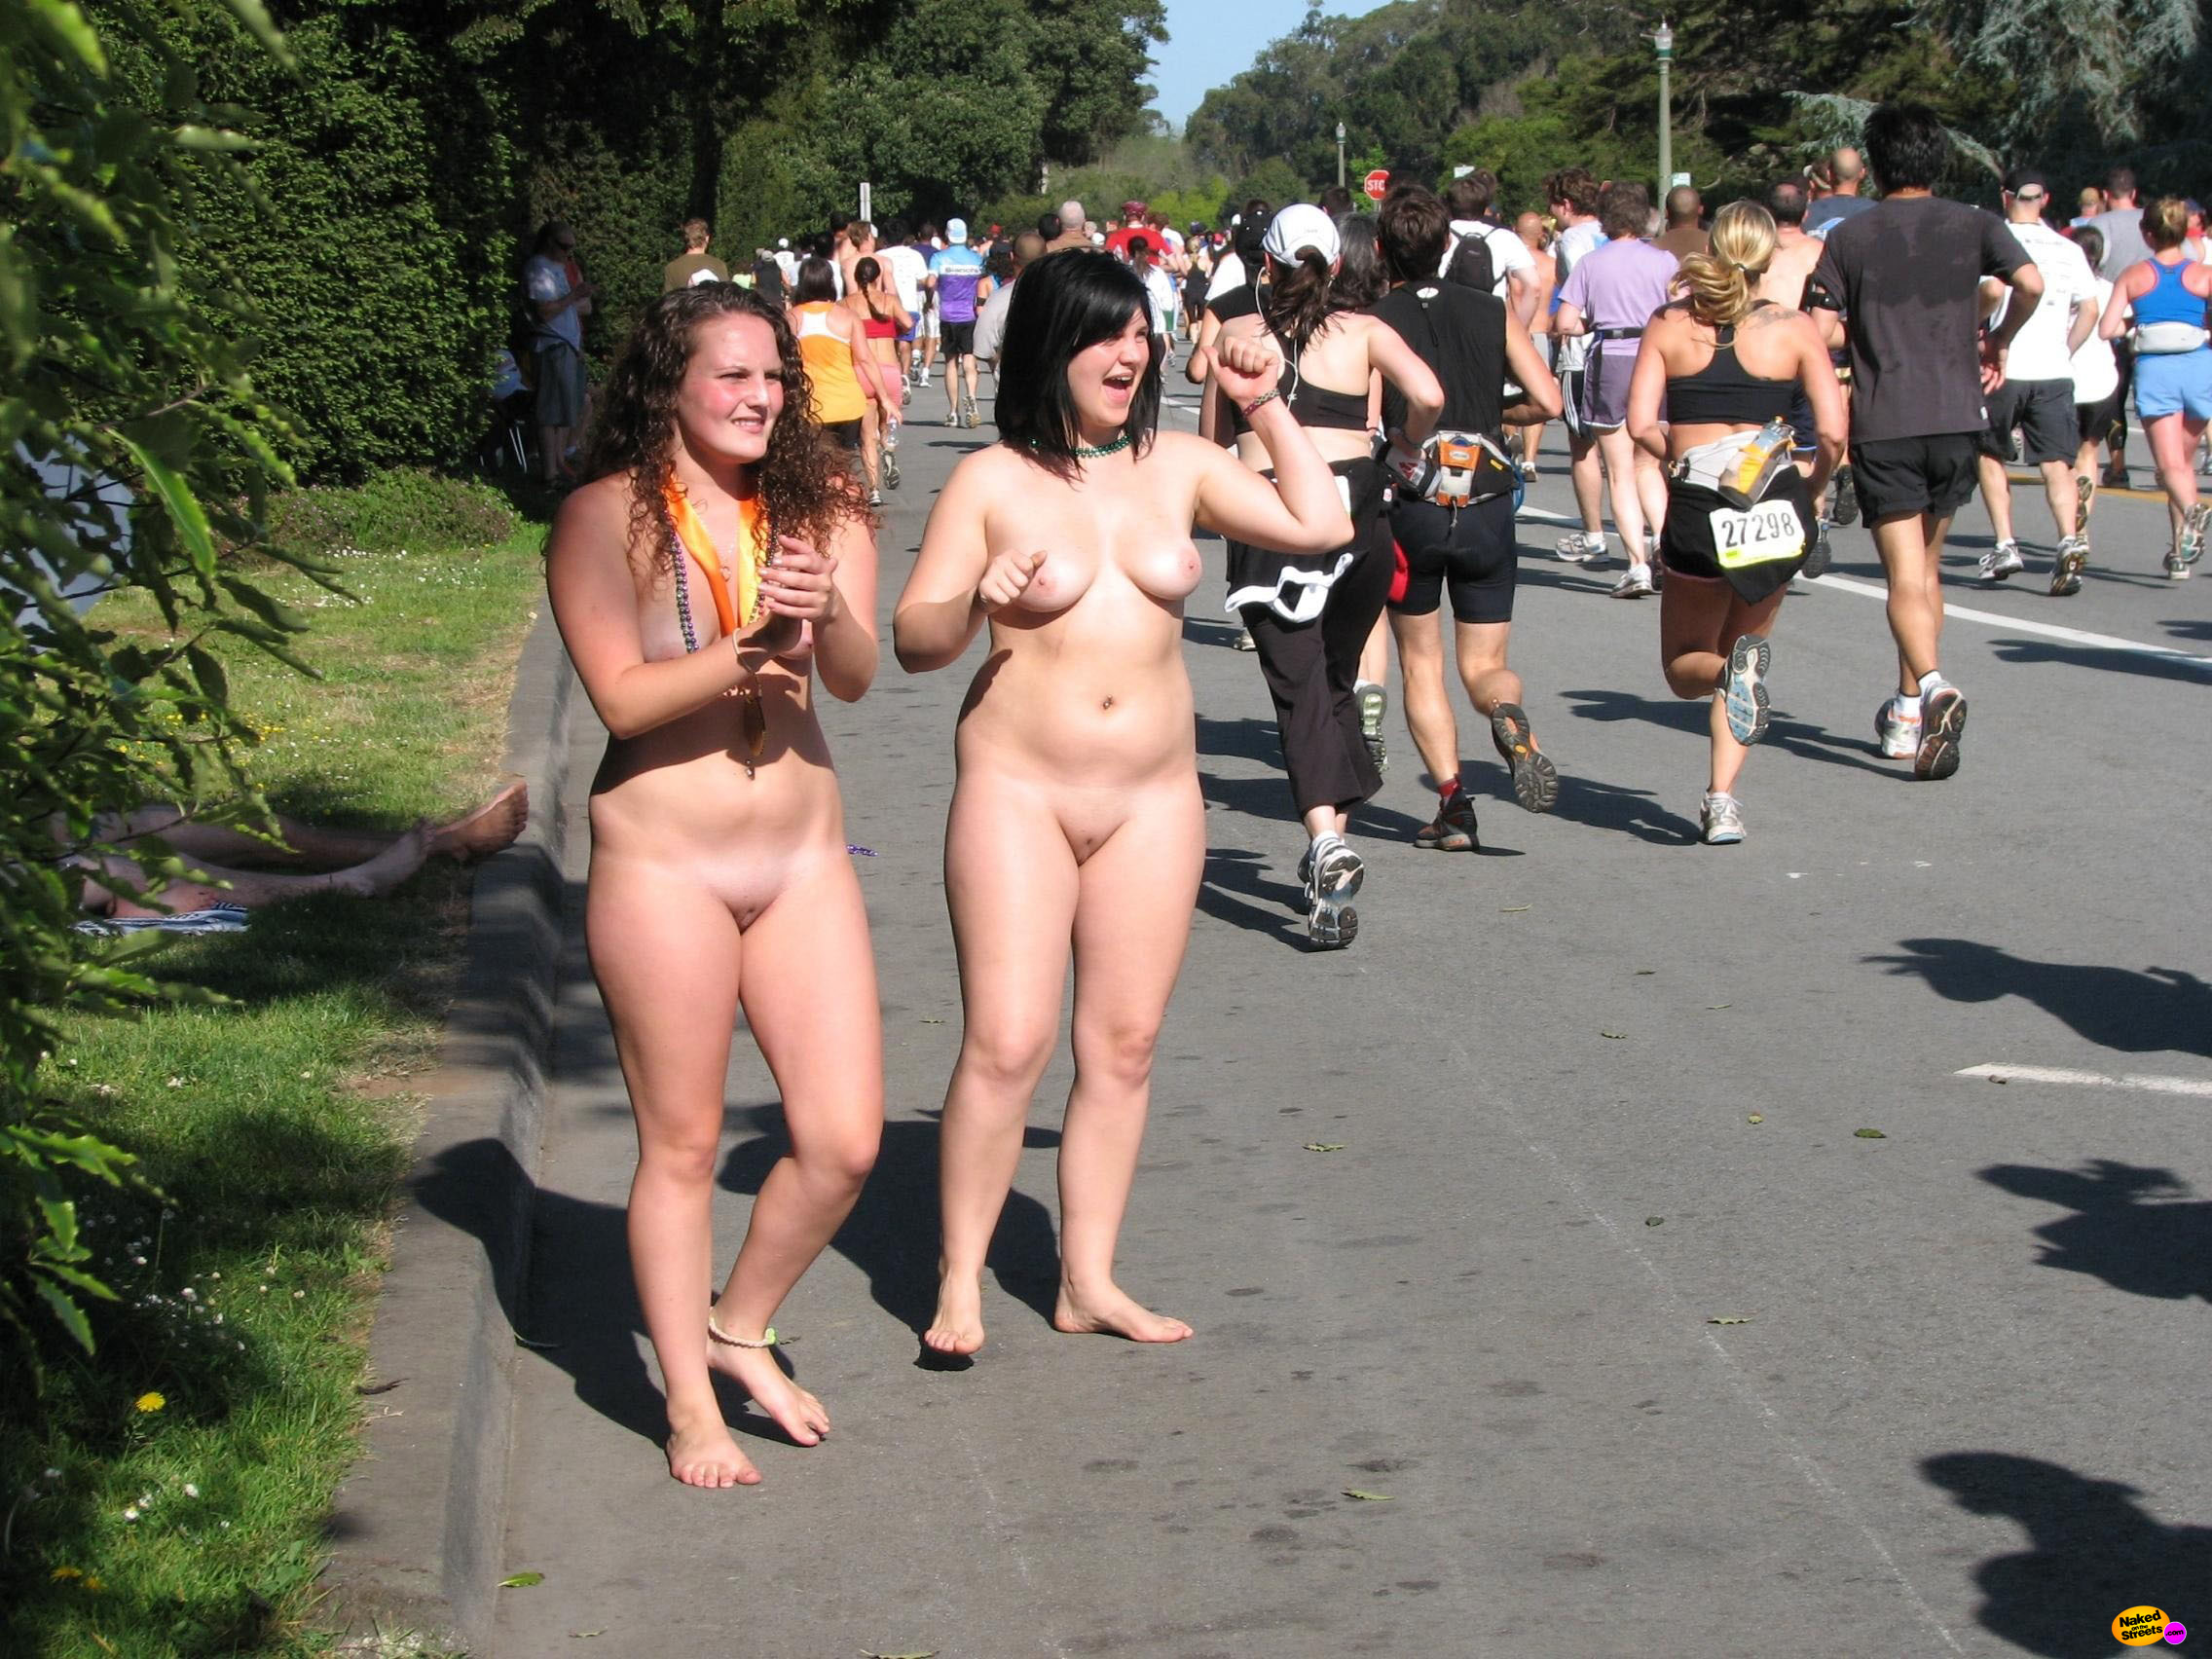 Two chubby naked teens cheer on marathon runners on a dare